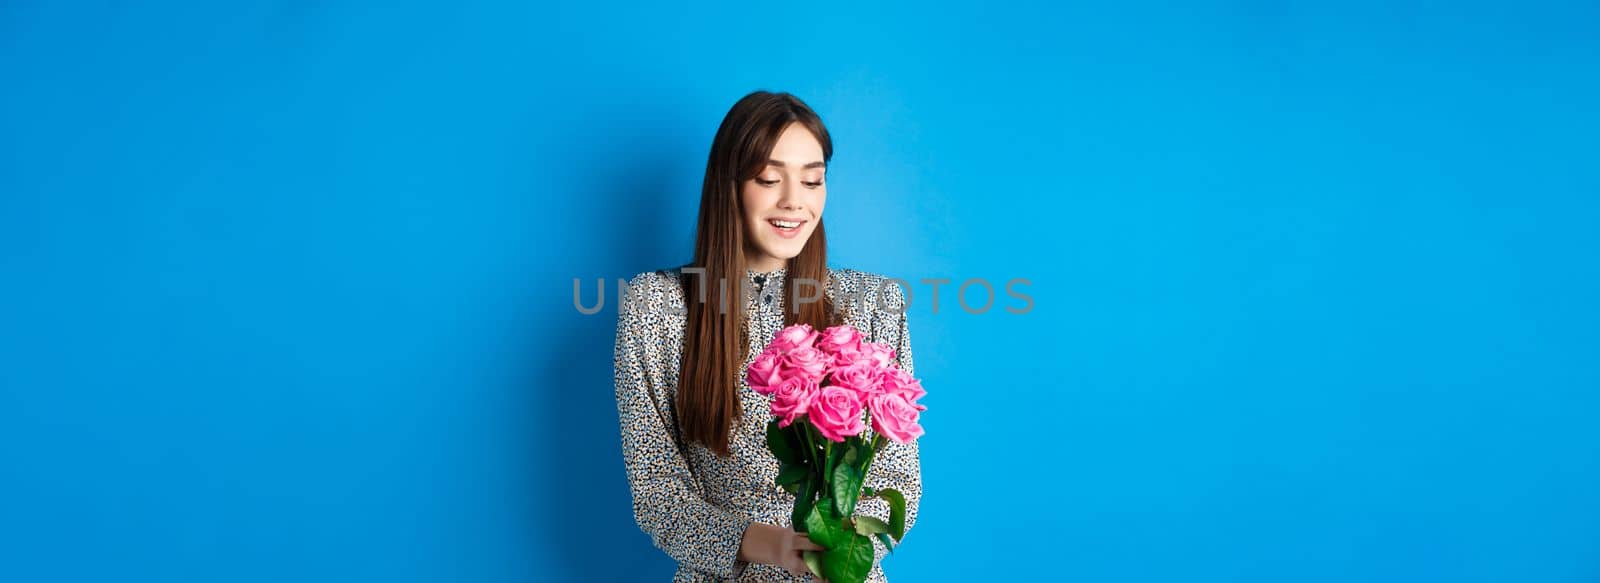 Valentines day concept. Romantic girl in dress looking happy at flowers, smiling at bouquet of pink roses, standing on blue background.